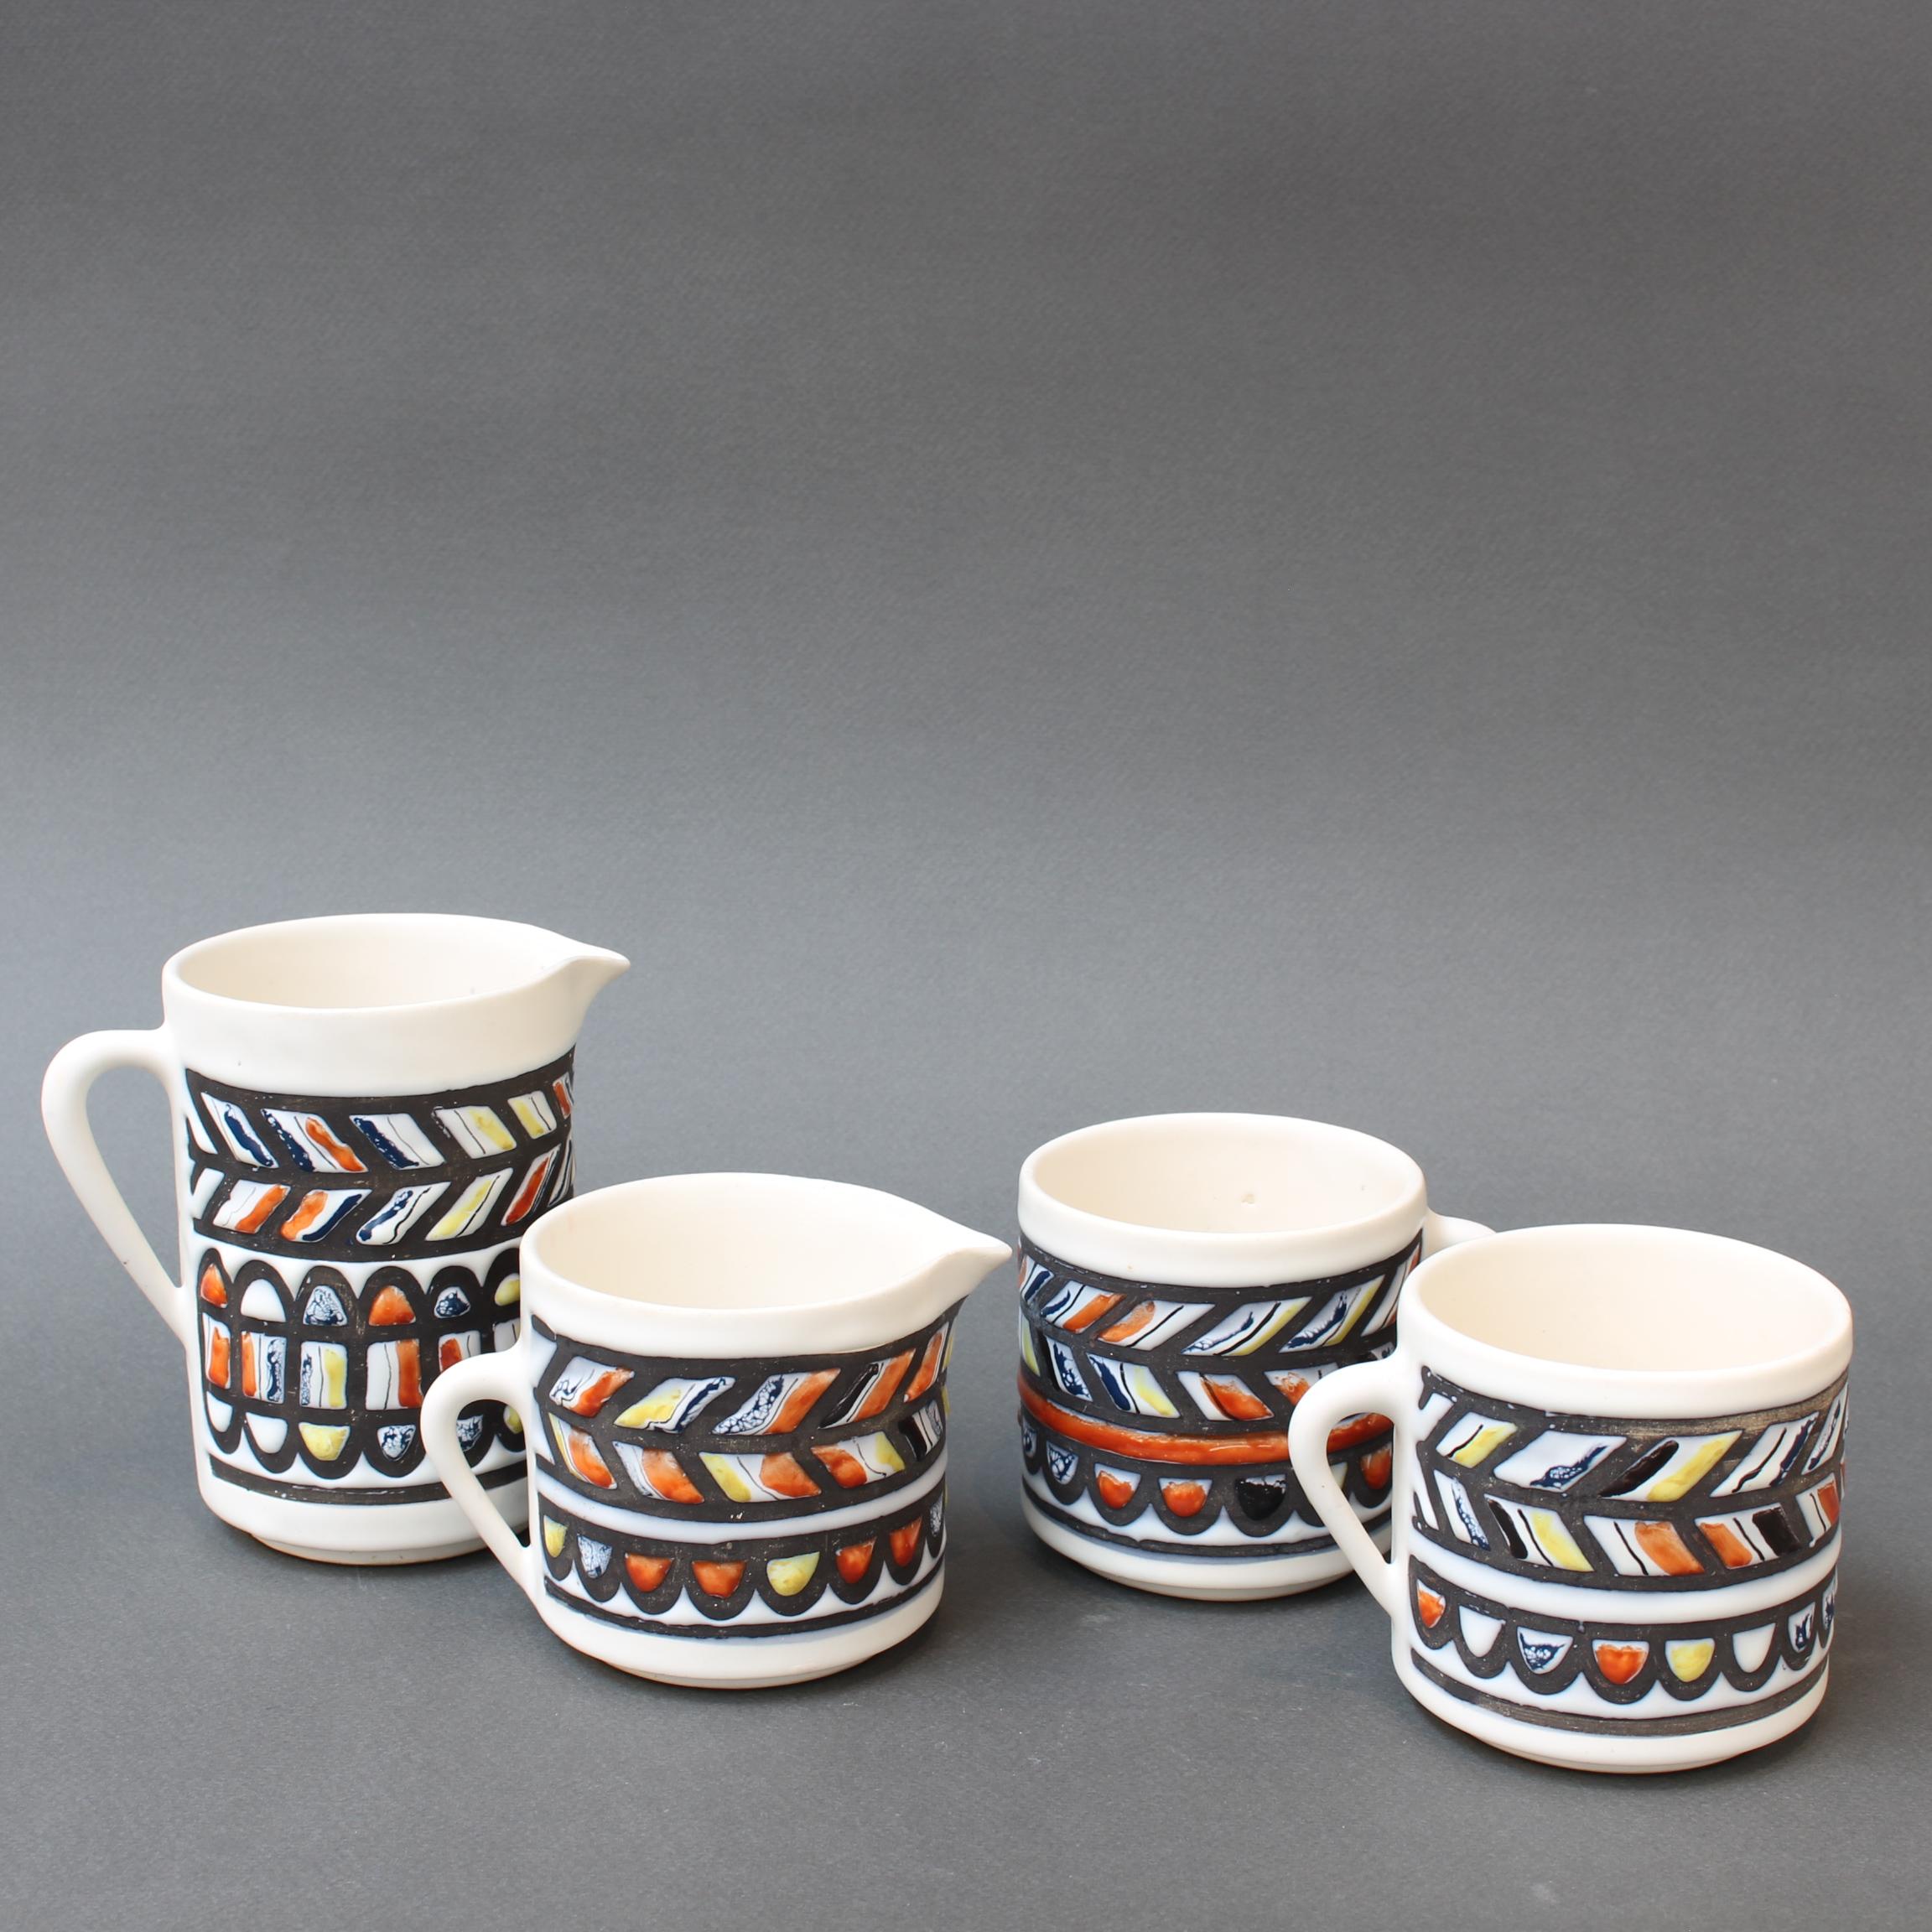 Vintage French Ceramic Set of Vessels by Roger Capron (circa 1960s) For Sale 11